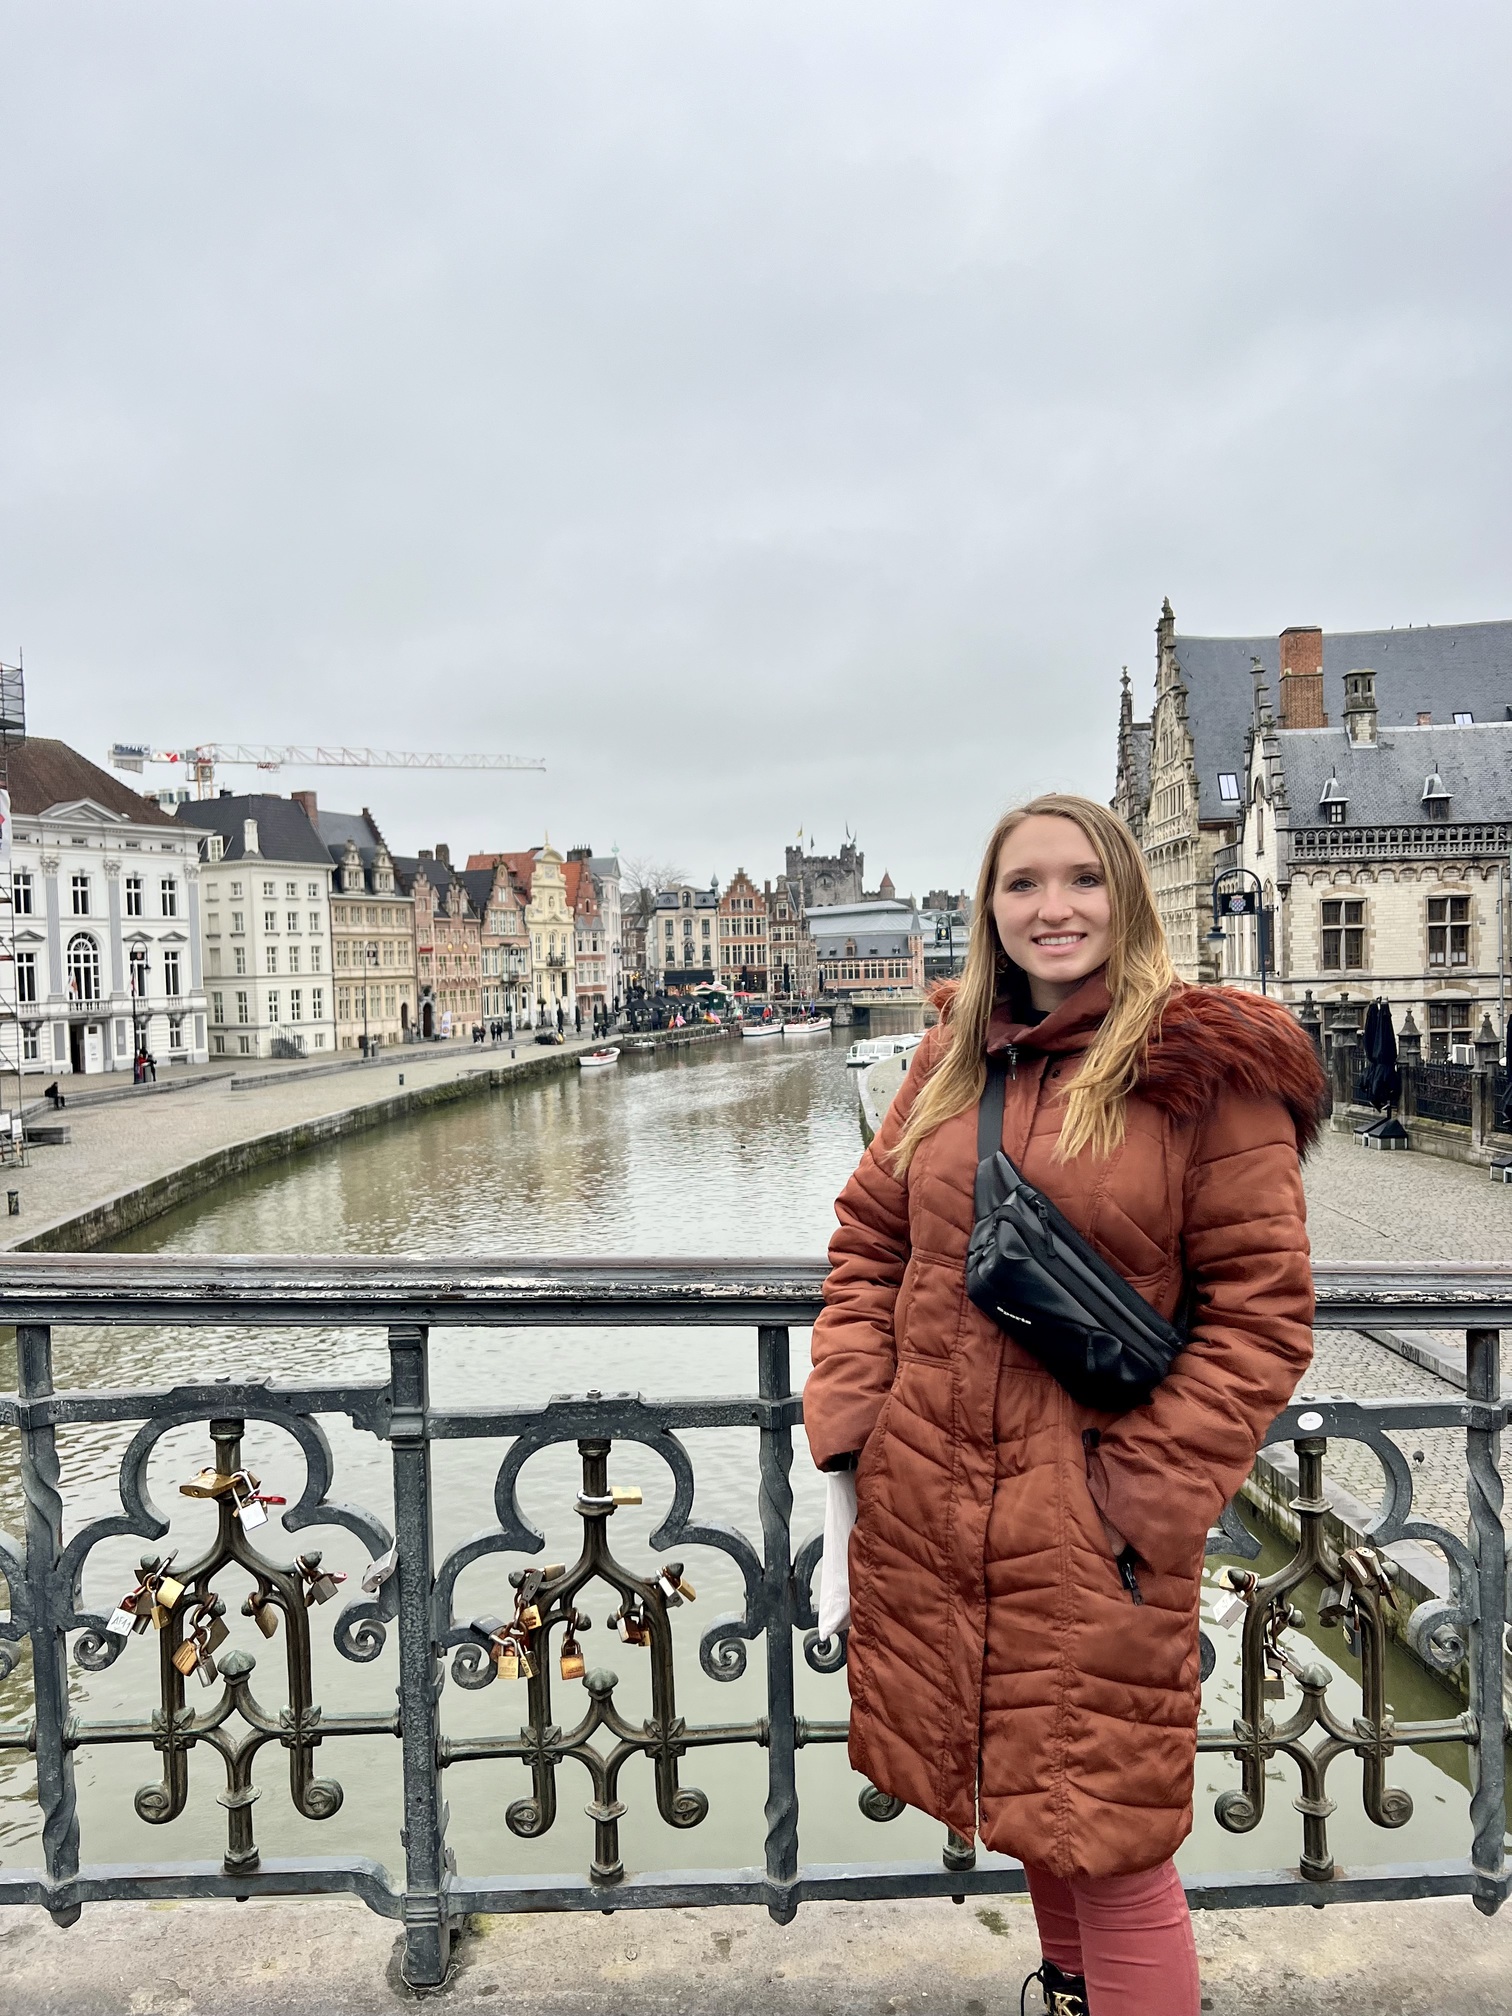 Enchanting view in Gent, Belgium, with ornate medieval architecture and bustling activity, capturing the essence of Belgian heritage and culture; travel guide to Ghent